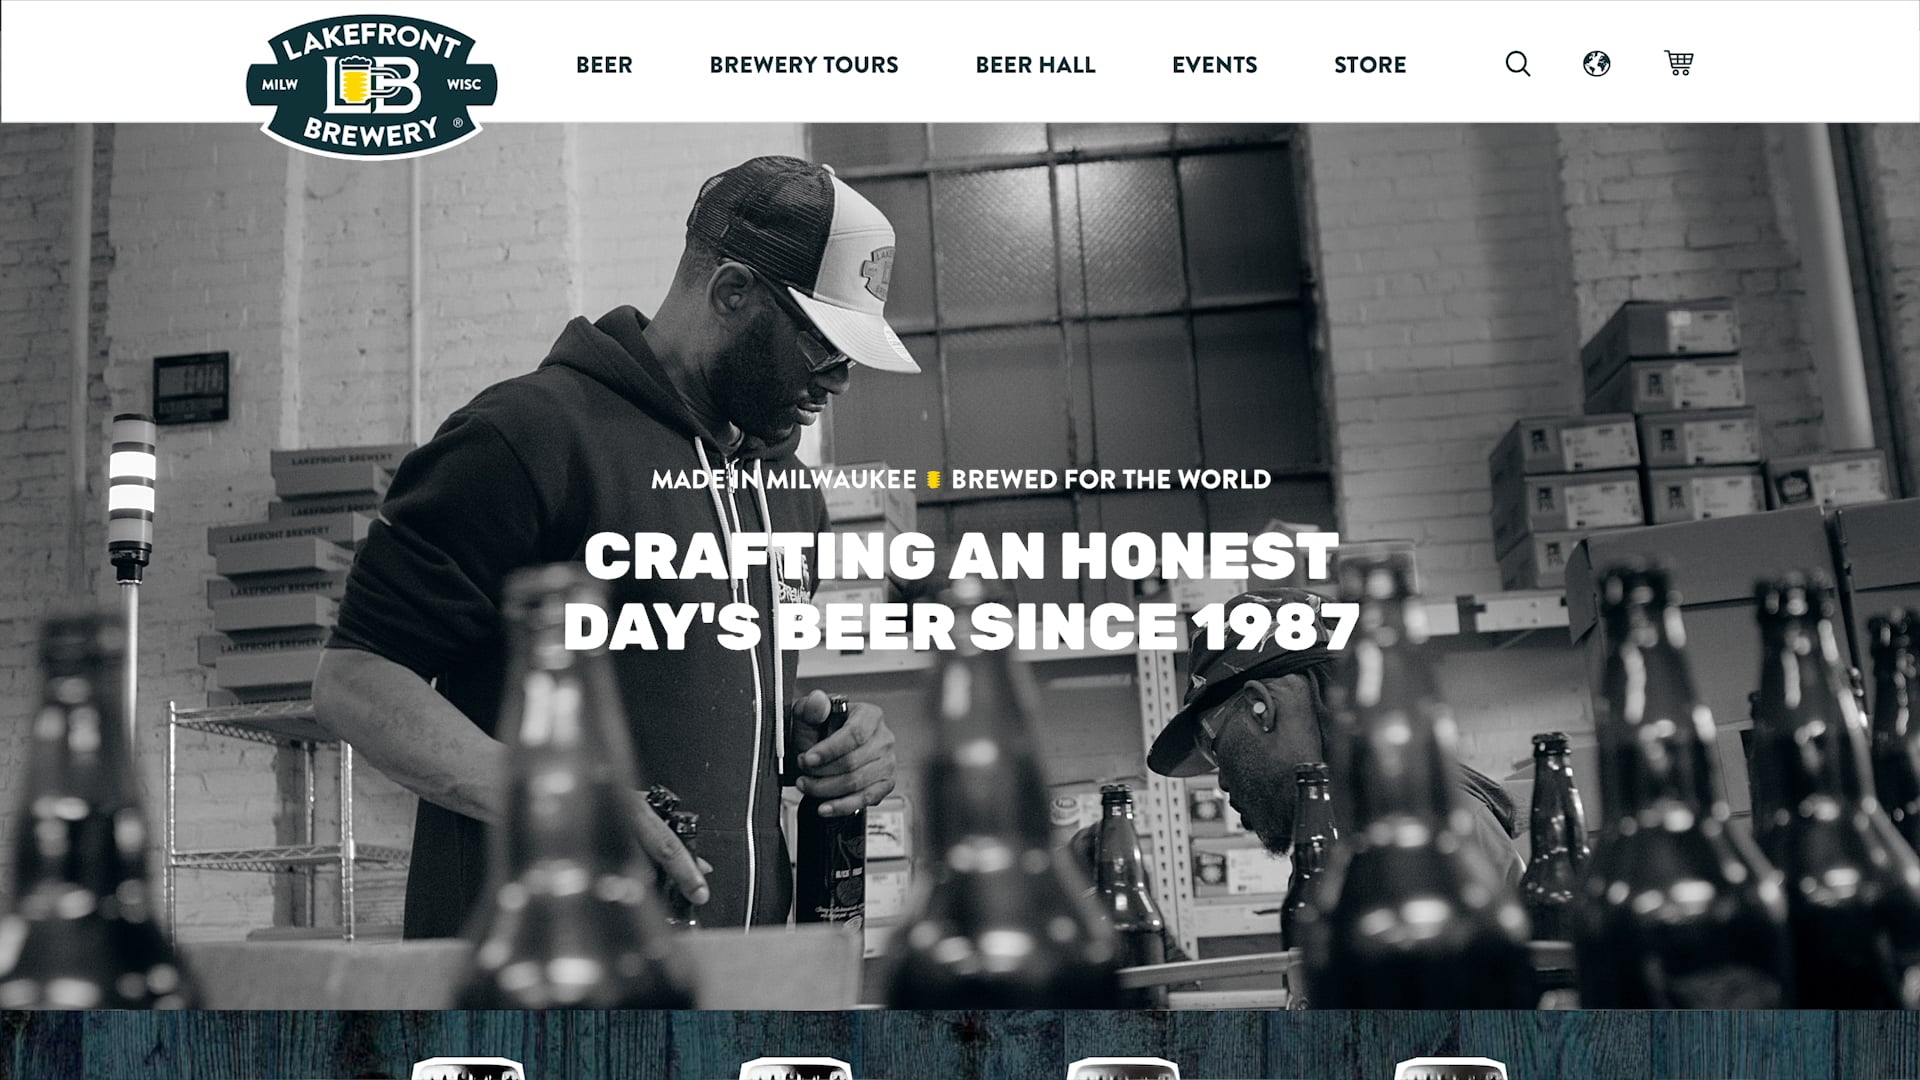 Lakefront Brewery Web Content